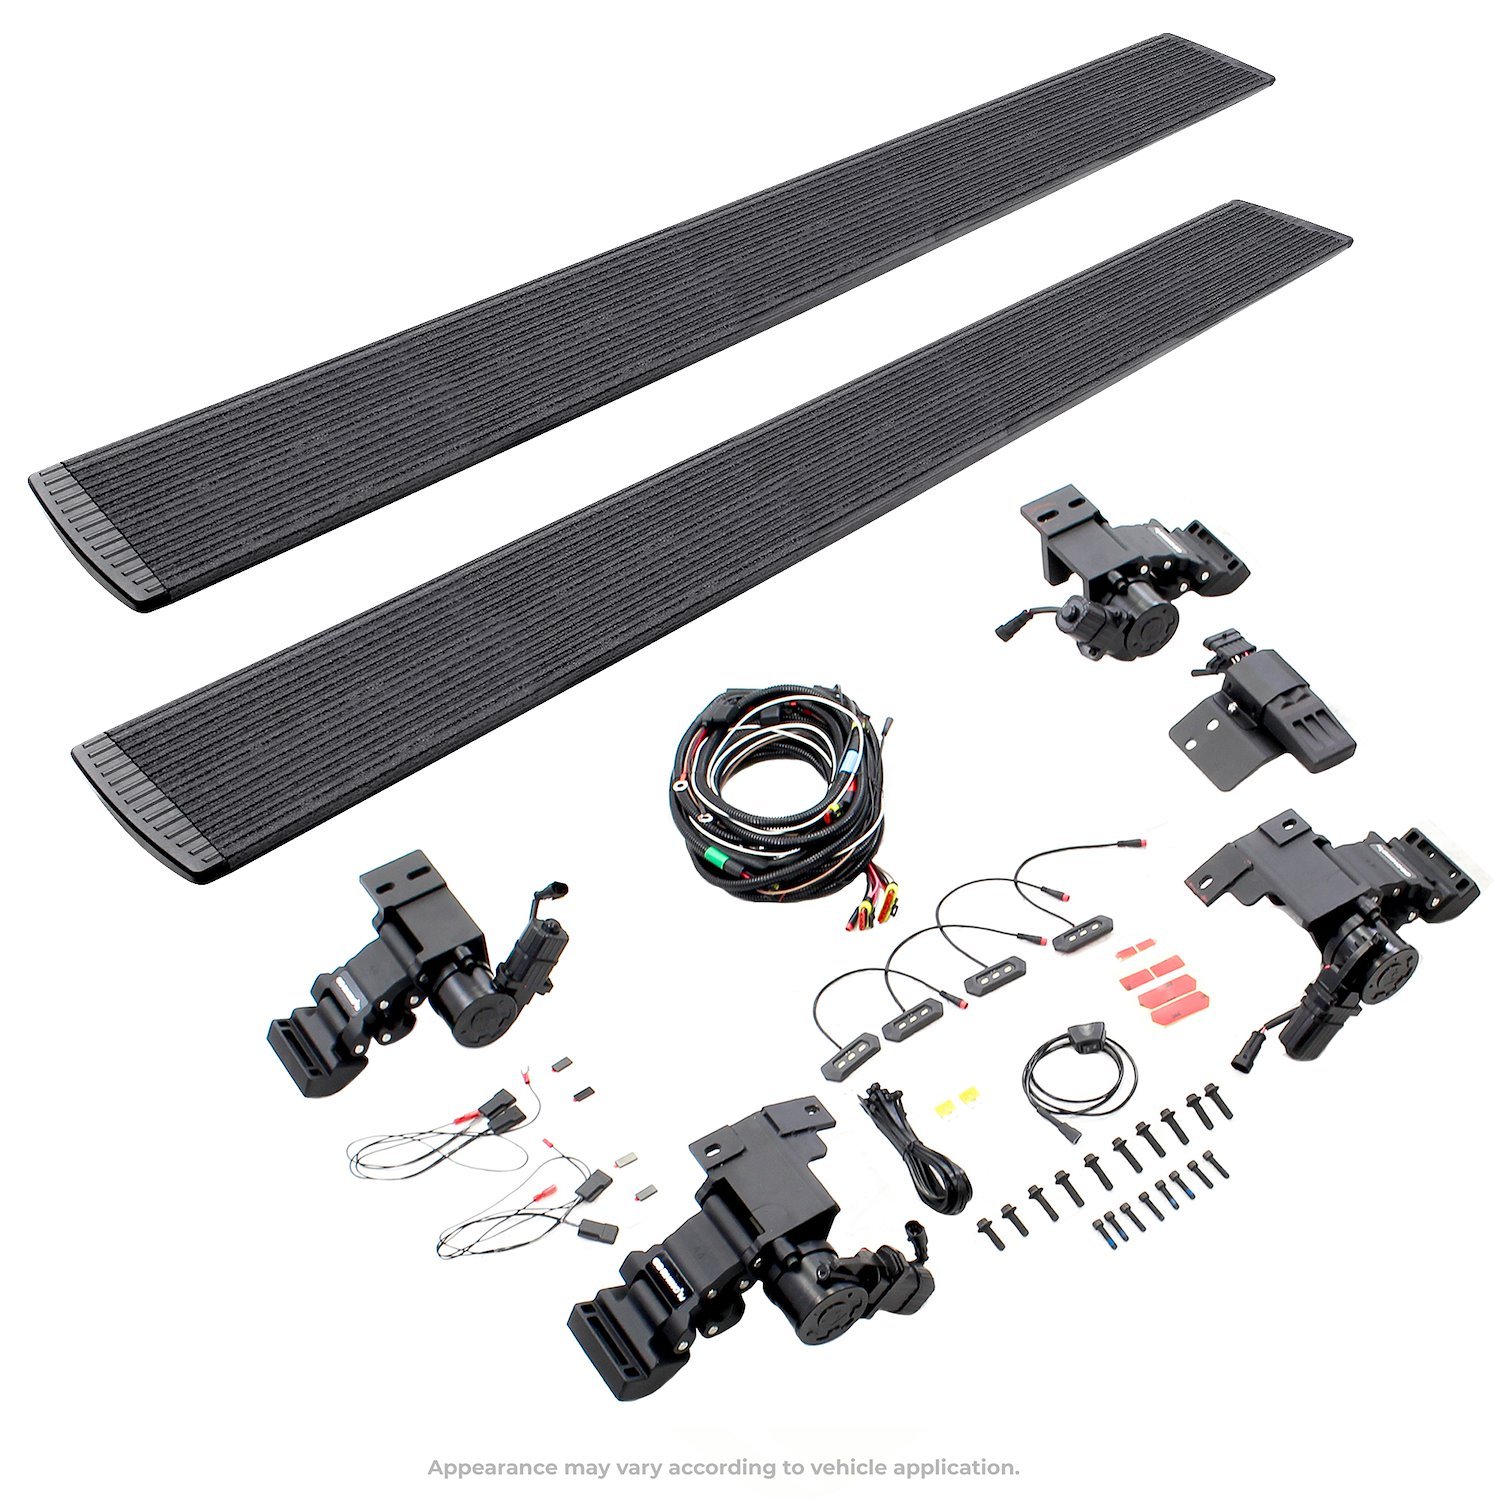 E1 Electric Running Board Kit Fits Select Ford F-350 Super Duty Super Cab Pickup